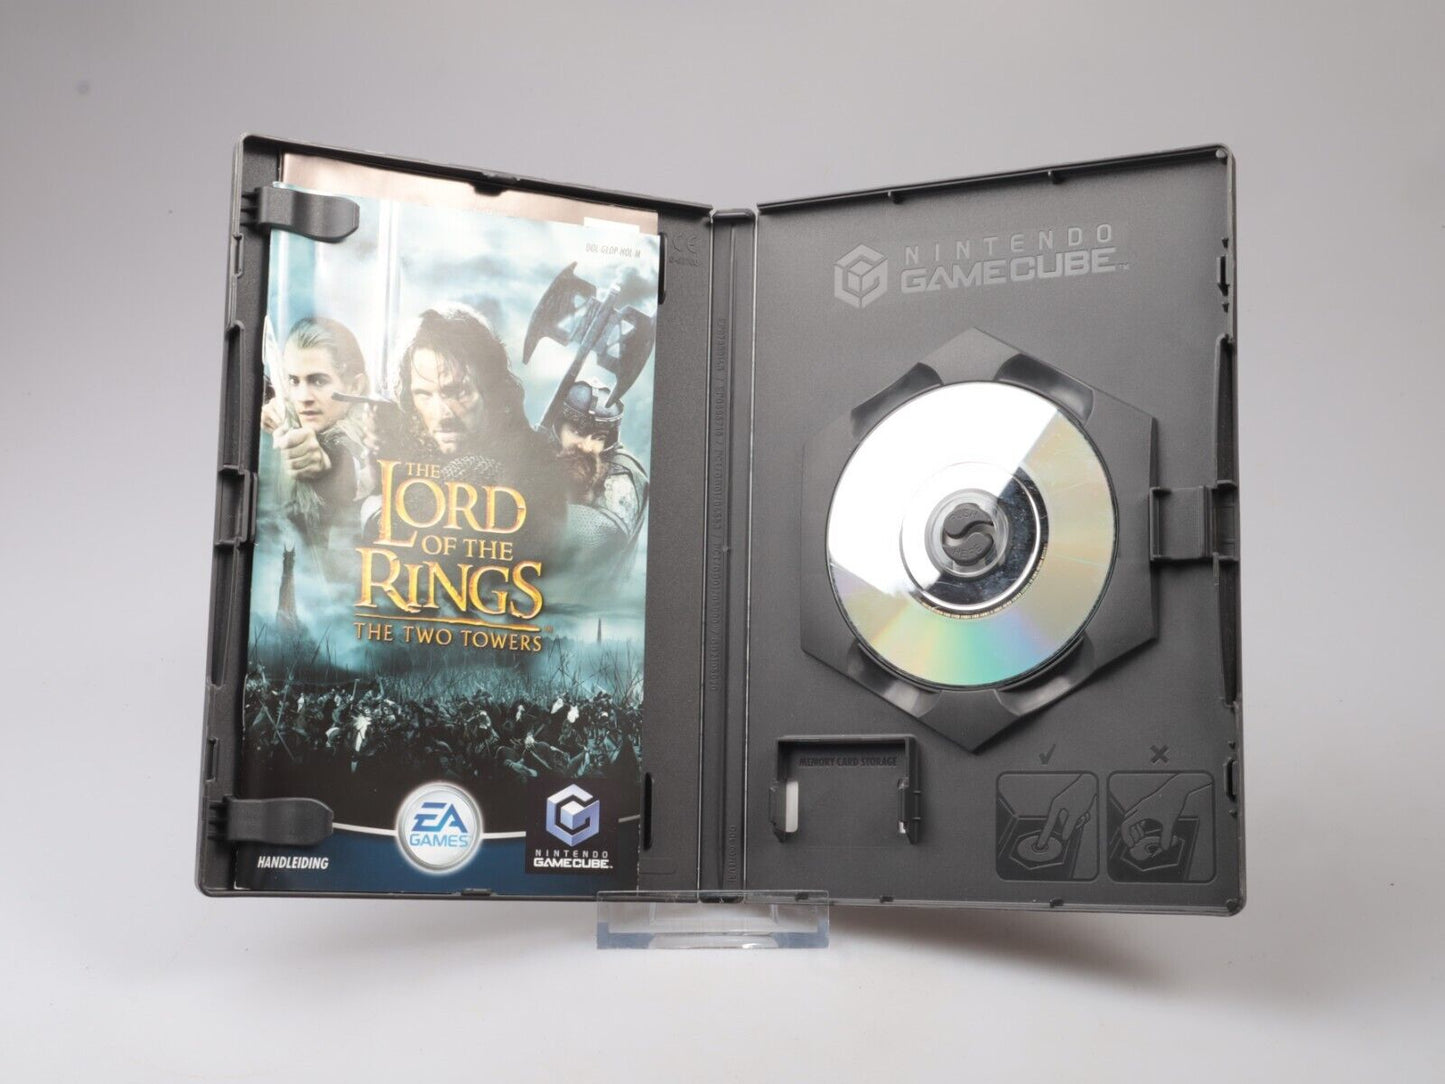 GameCube | The Lord of the Rings: De twee torens | PAL HOL 